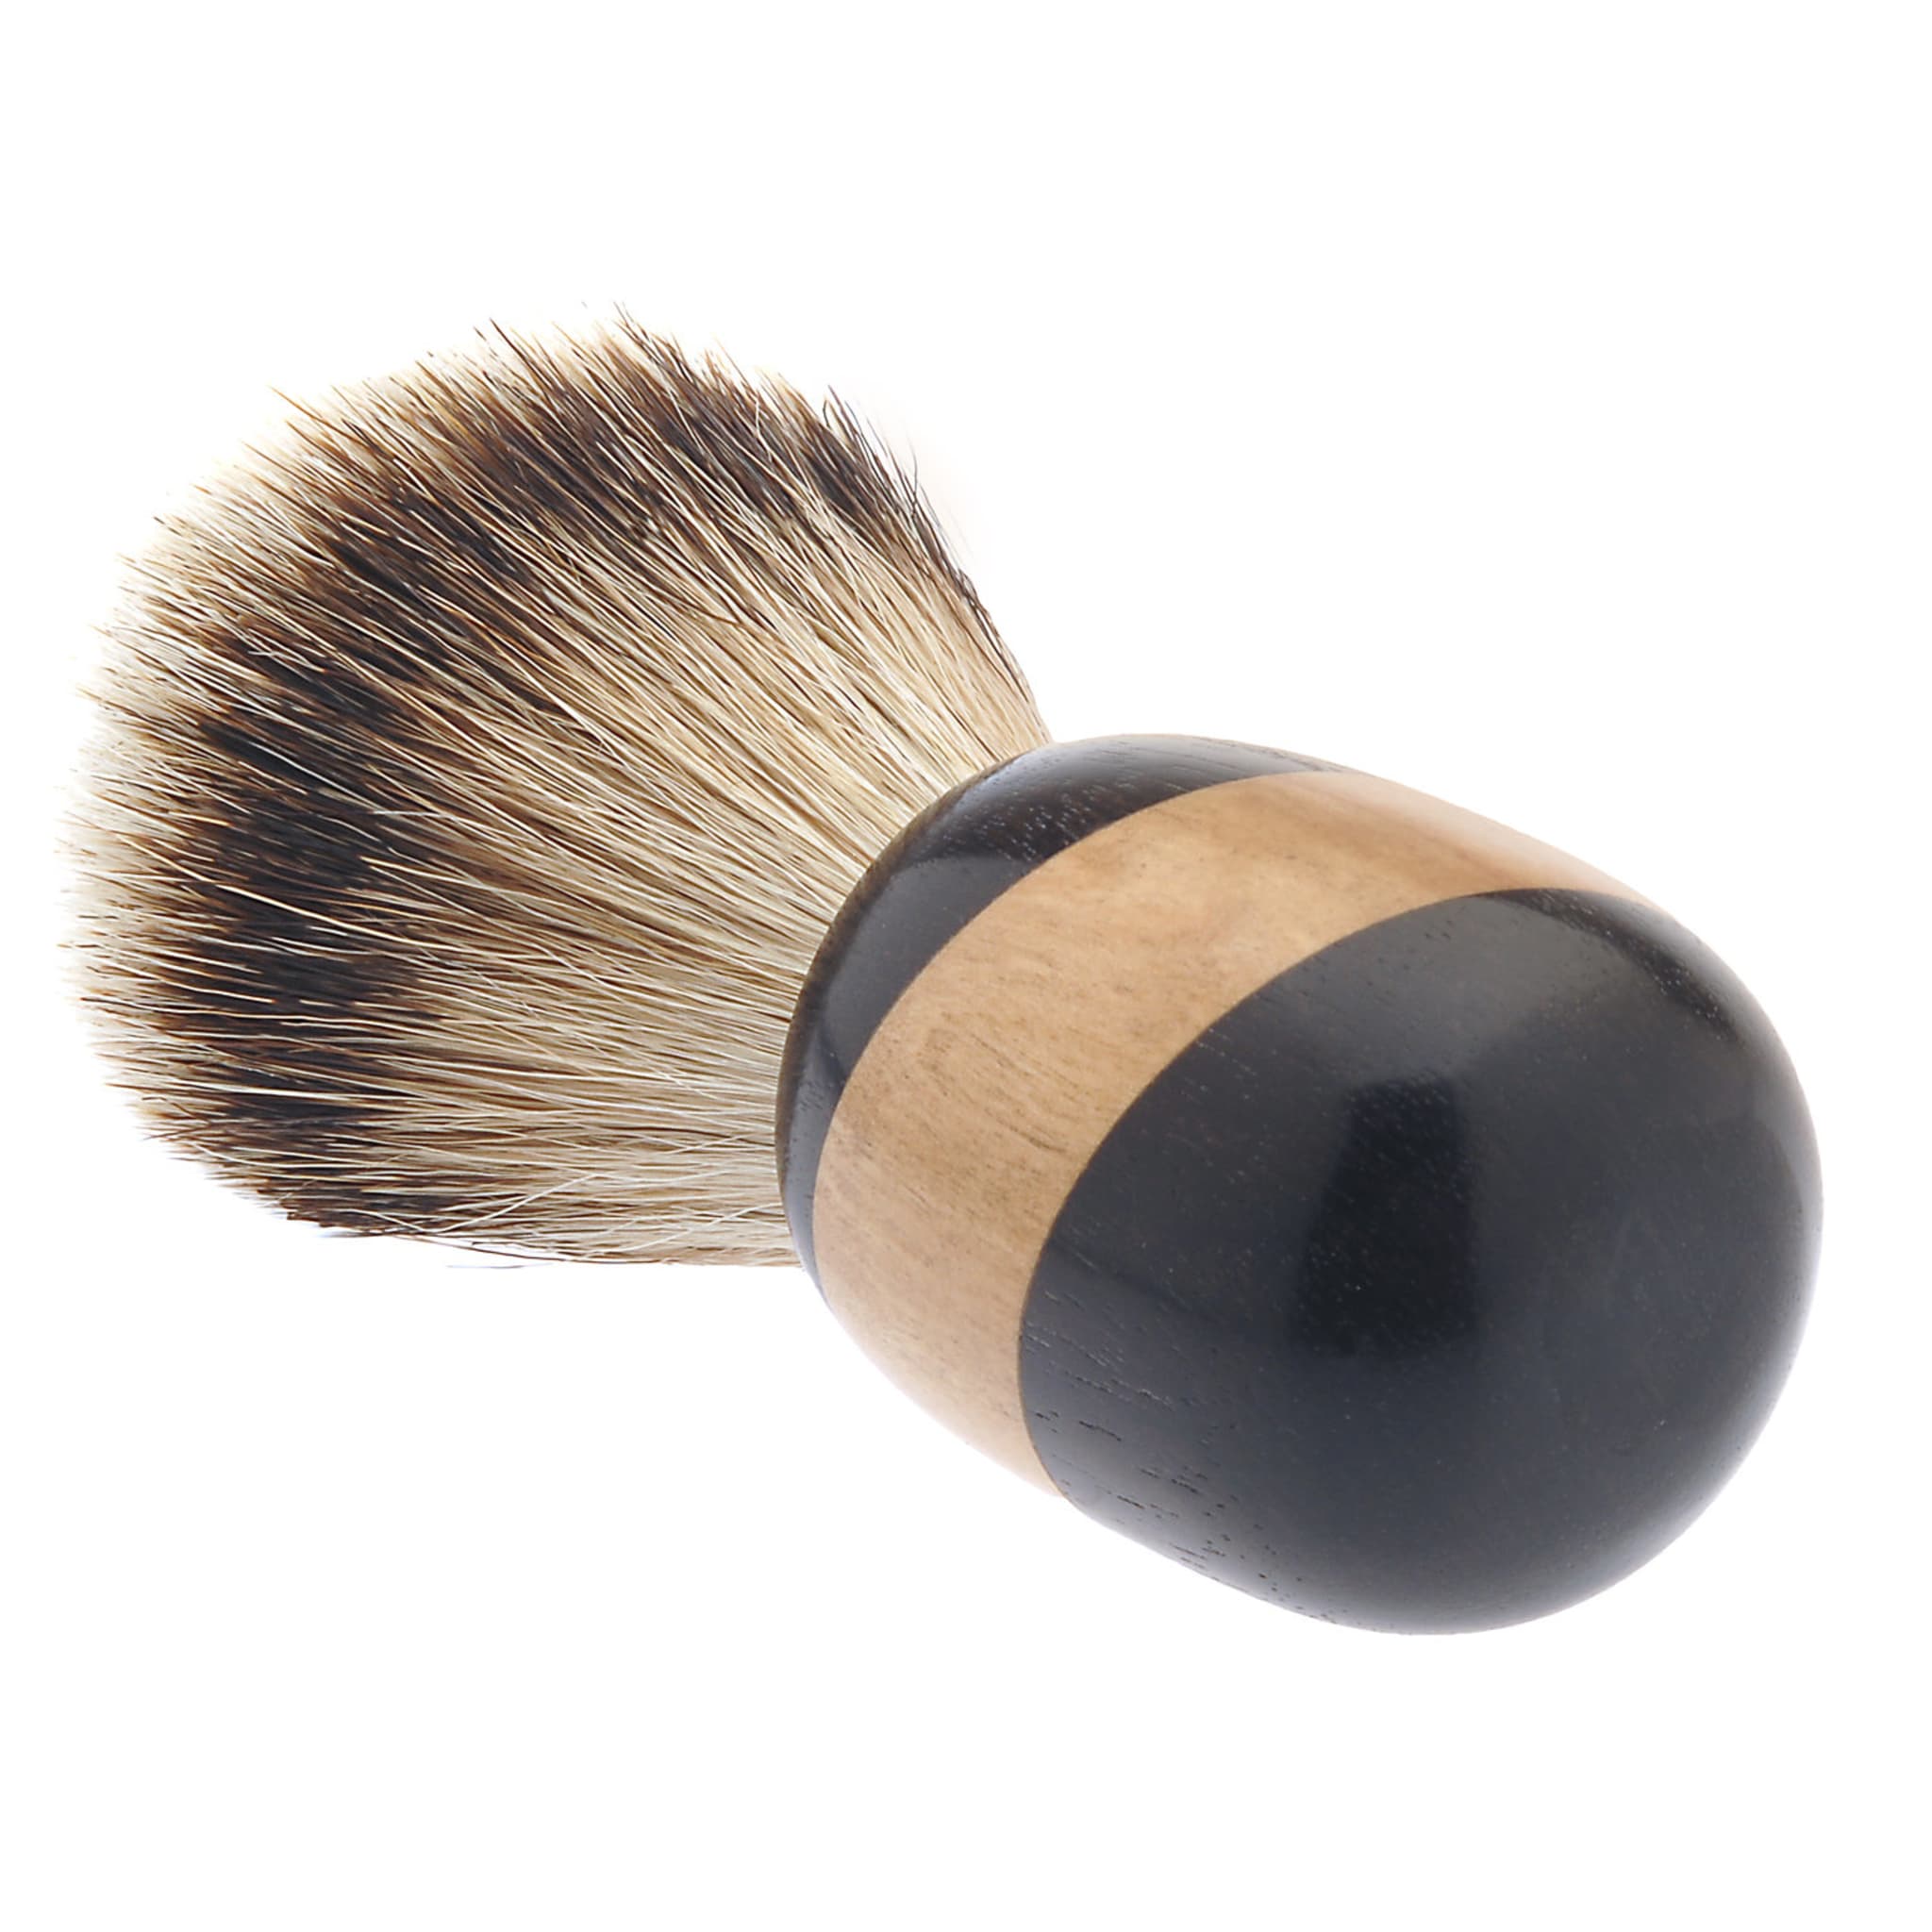 Shaving Brush in Maple and African Ebony Wood - Alternative view 3